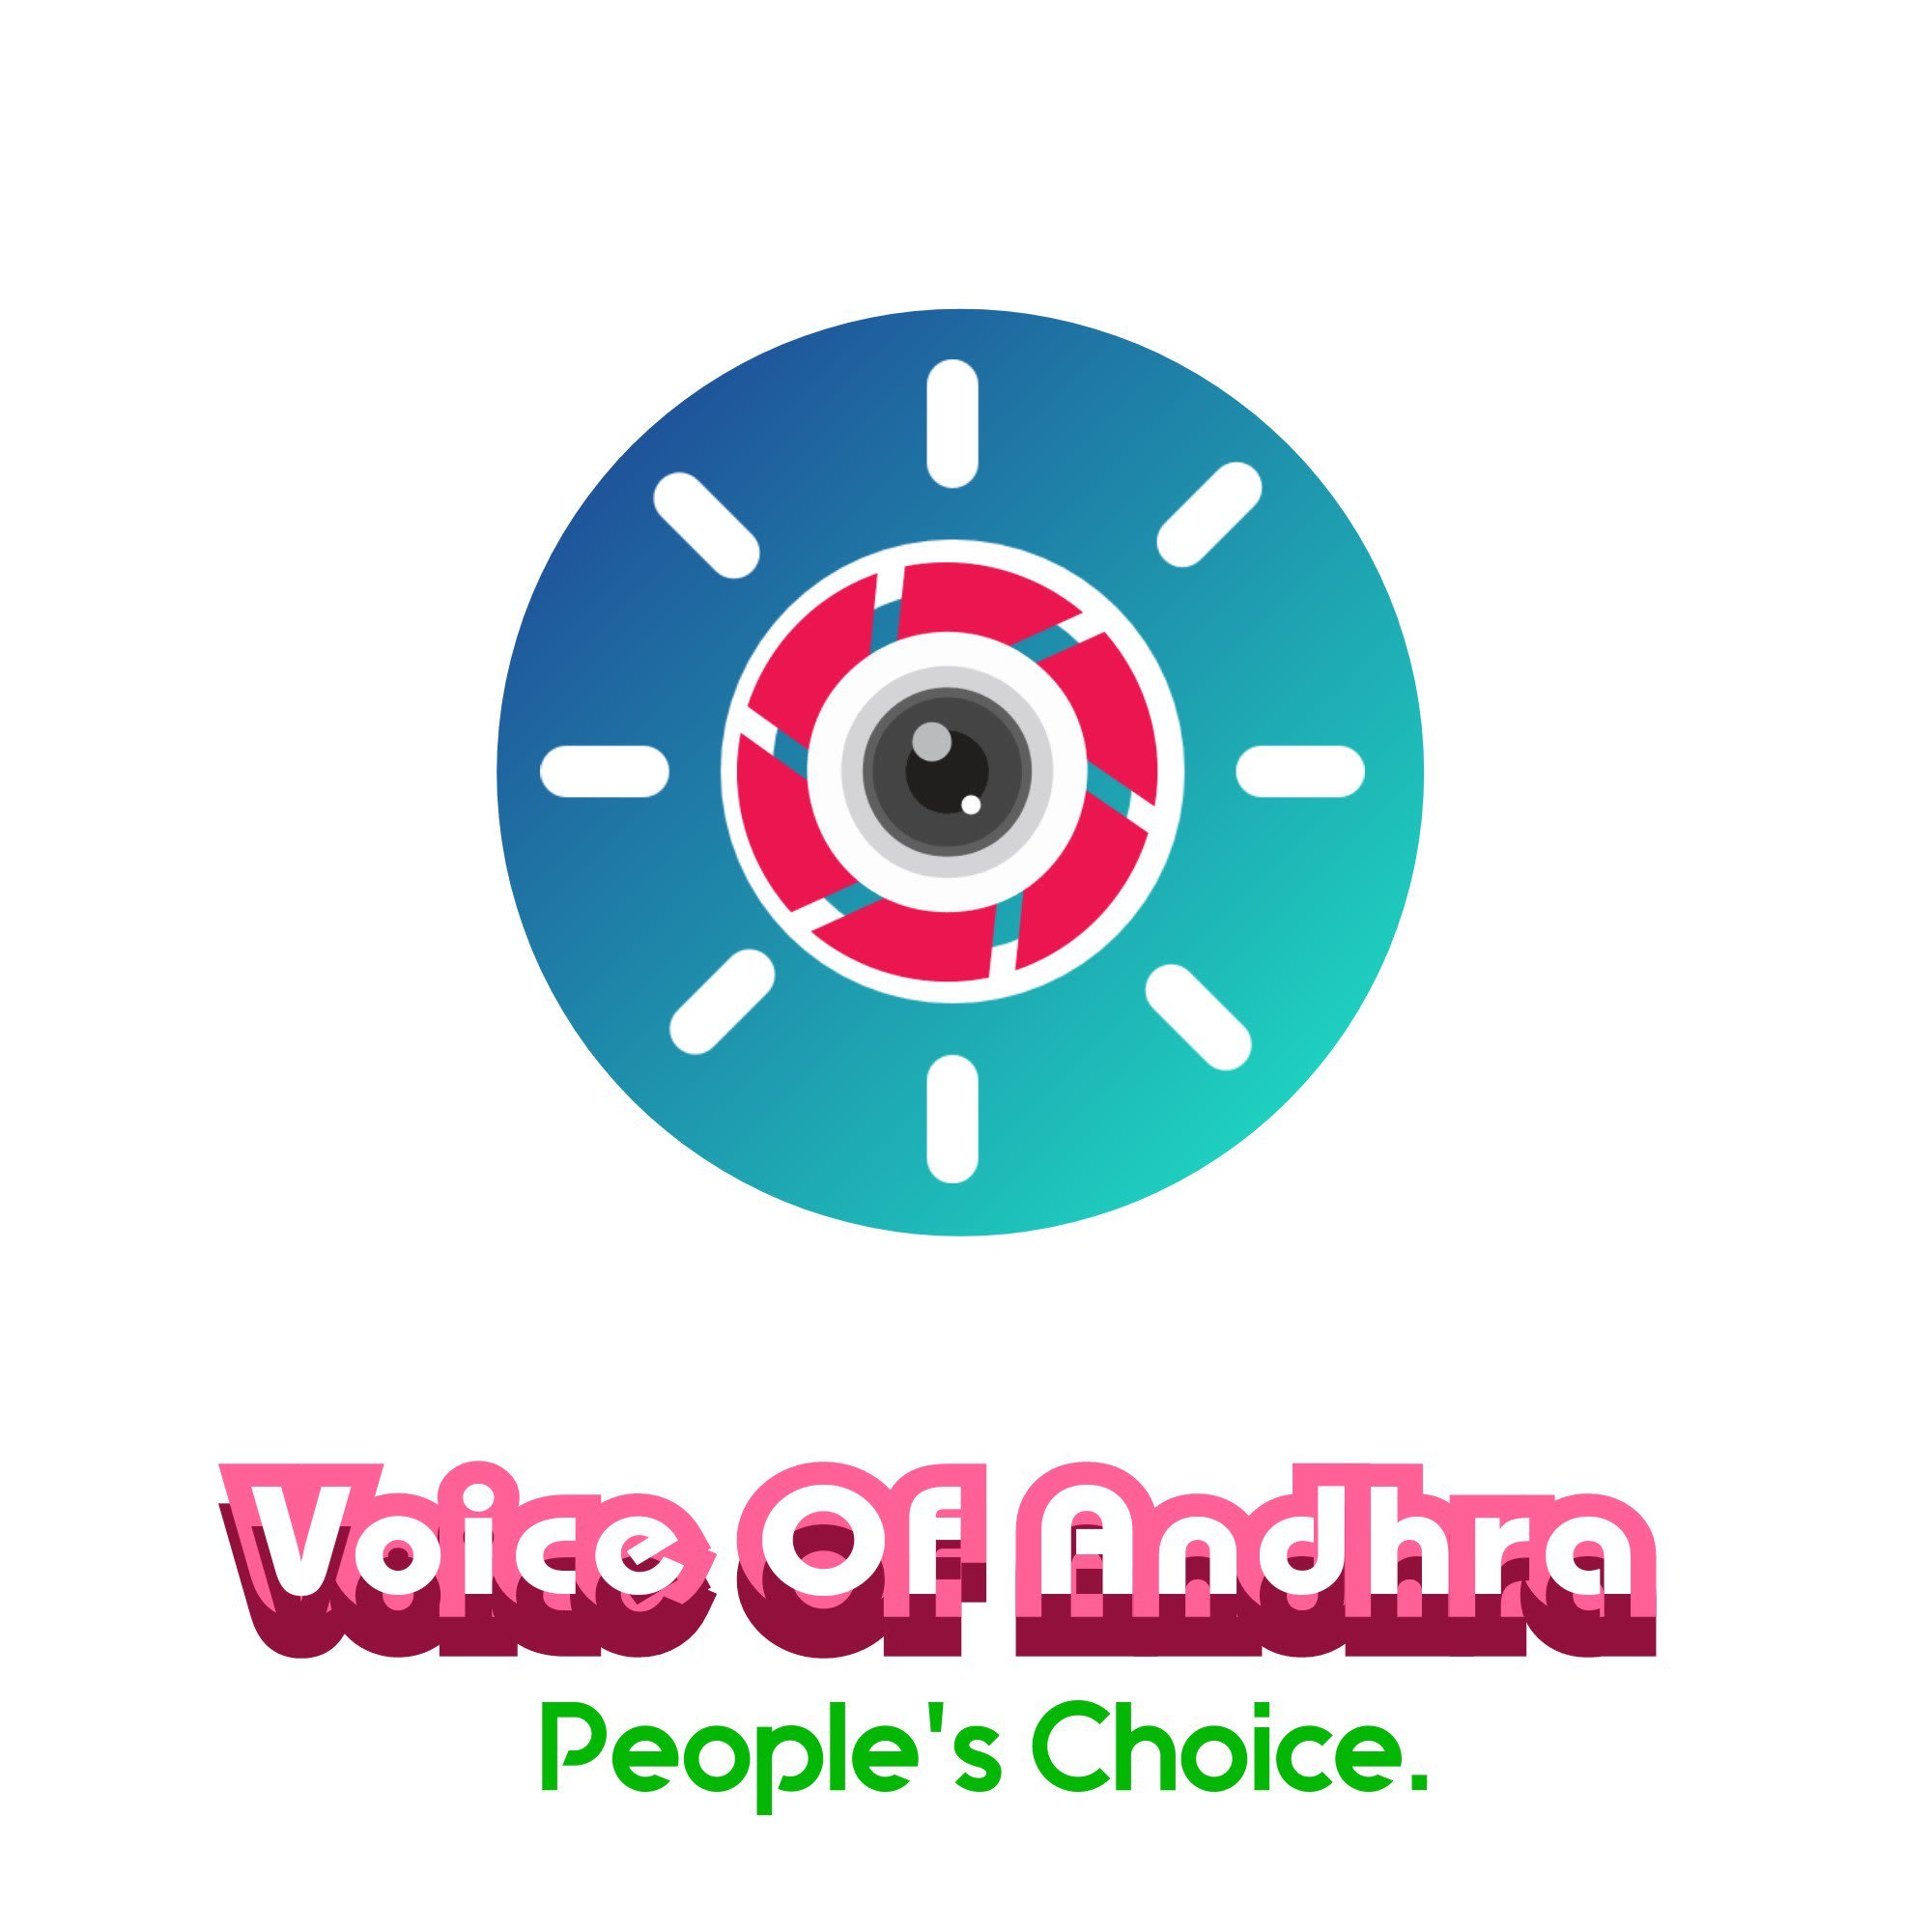 Voice Of Andhra